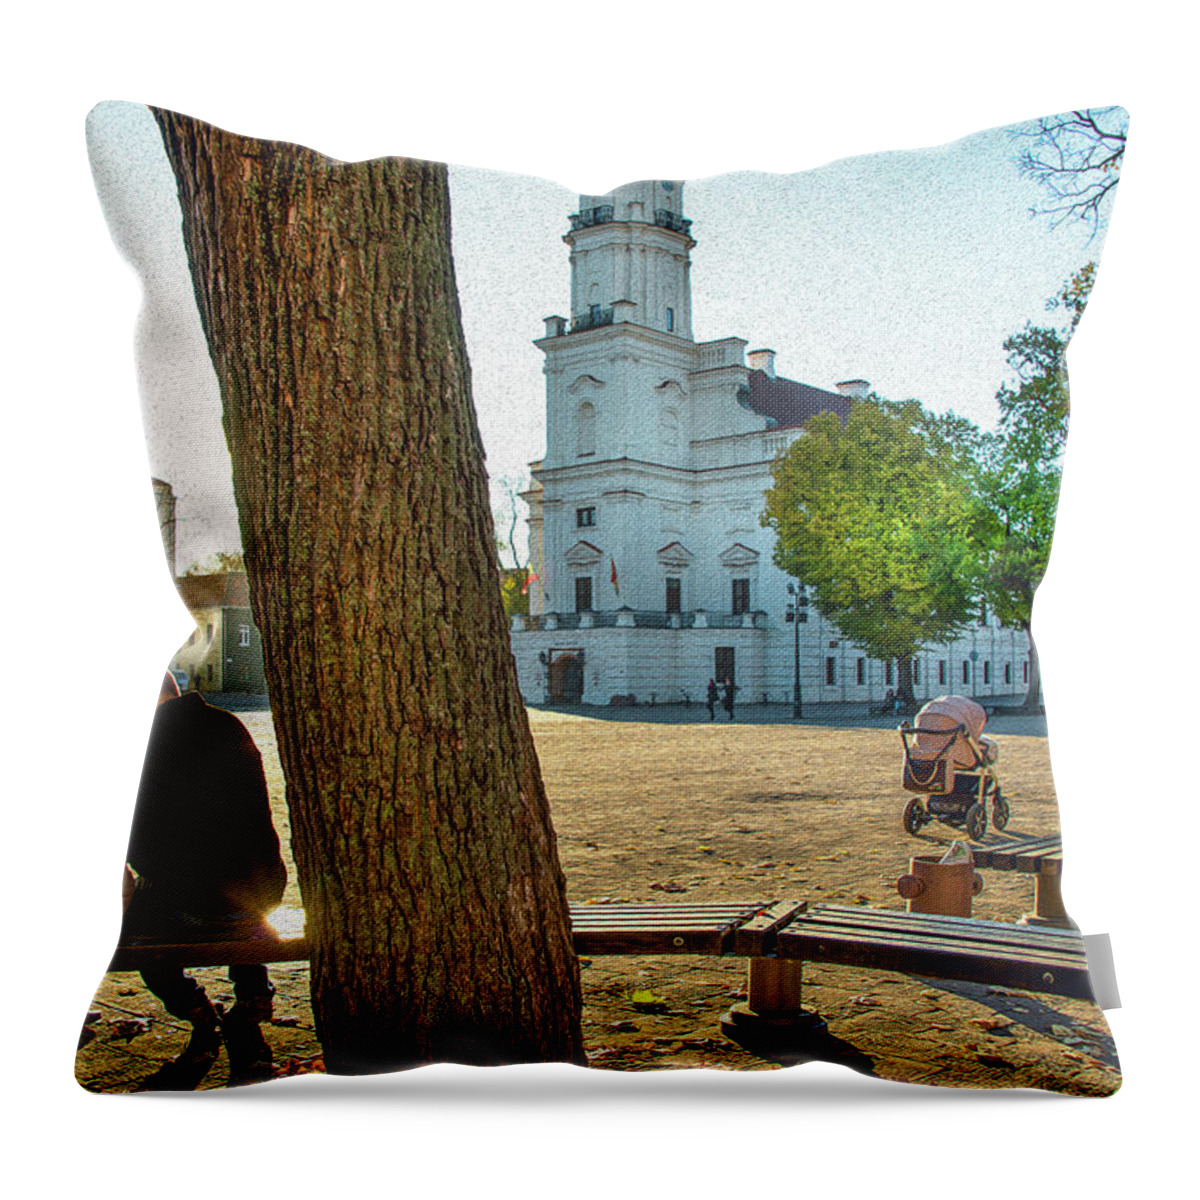 Whisper Throw Pillow featuring the photograph Whispered Words by Robert Lacy